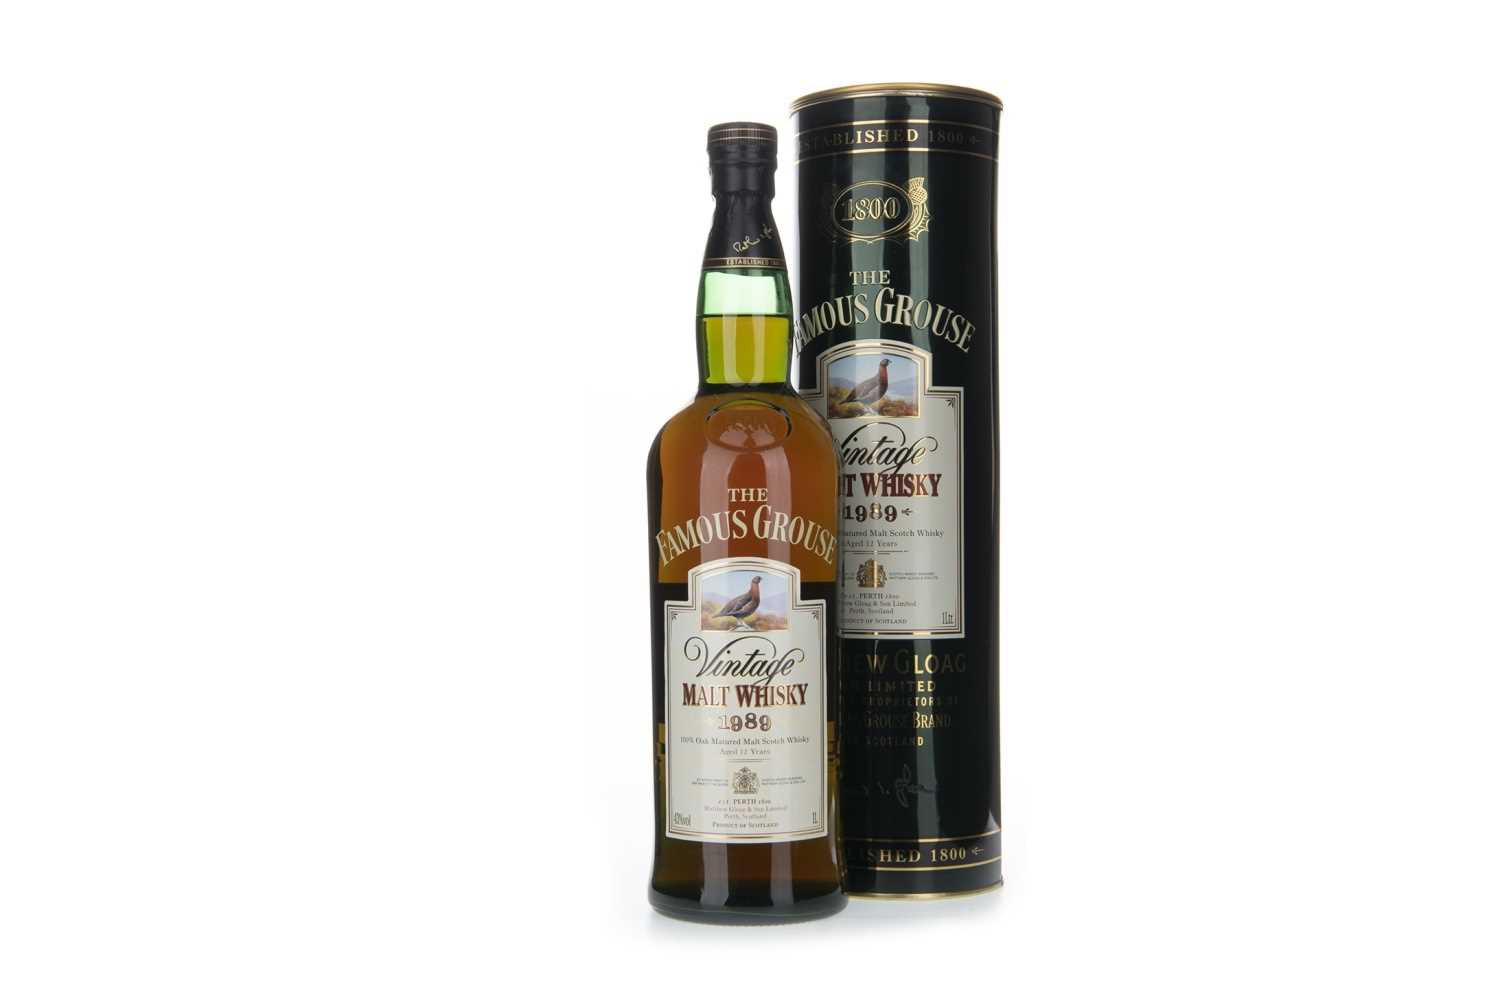 Lot 249 - FAMOUS GROUSE 1989 MALT AGED 12 YEARS - ONE LITRE